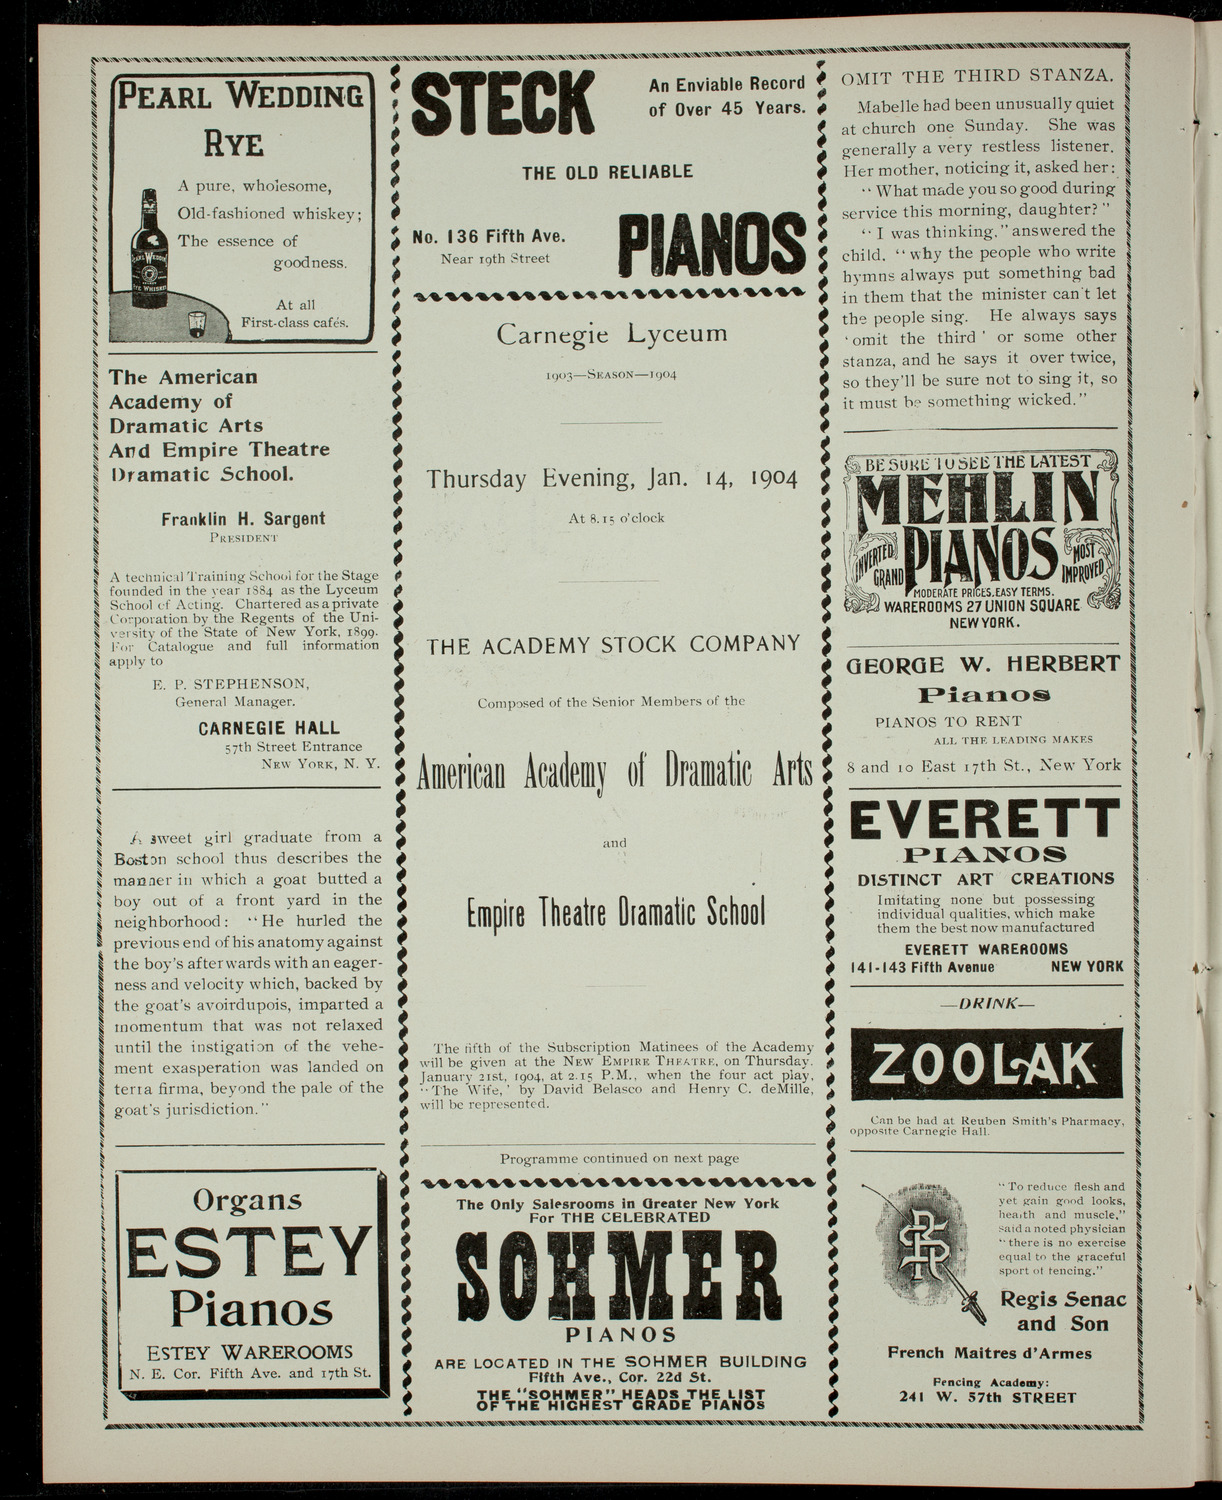 Academy Stock Company of the American Academy of Dramatic Arts/ Empire Theatre Dramatic School, January 14, 1904, program page 2